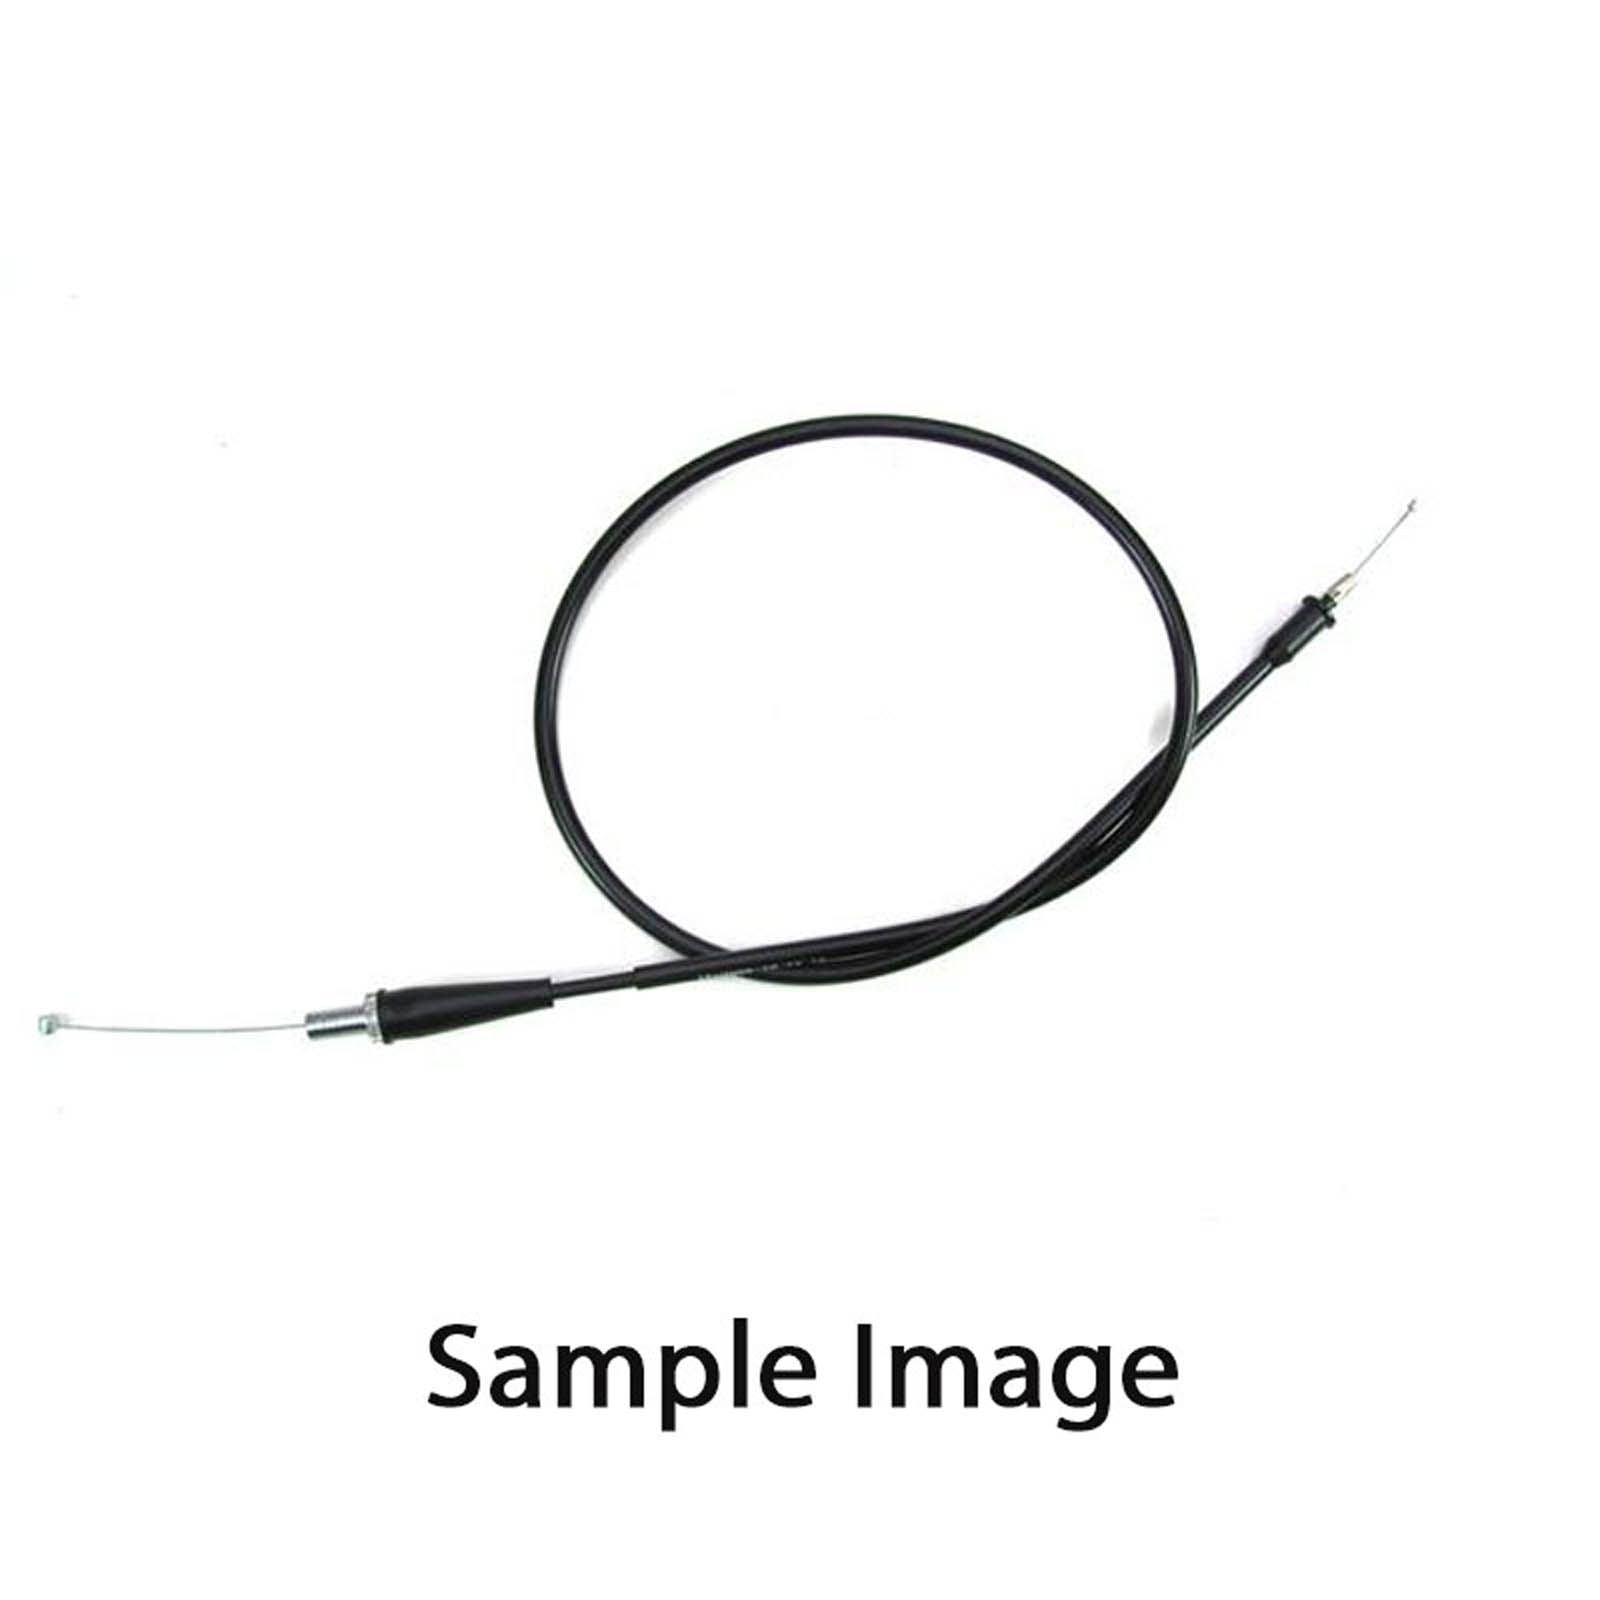 New WHITES Cable Throttle For Honda CTX200 #MP071195